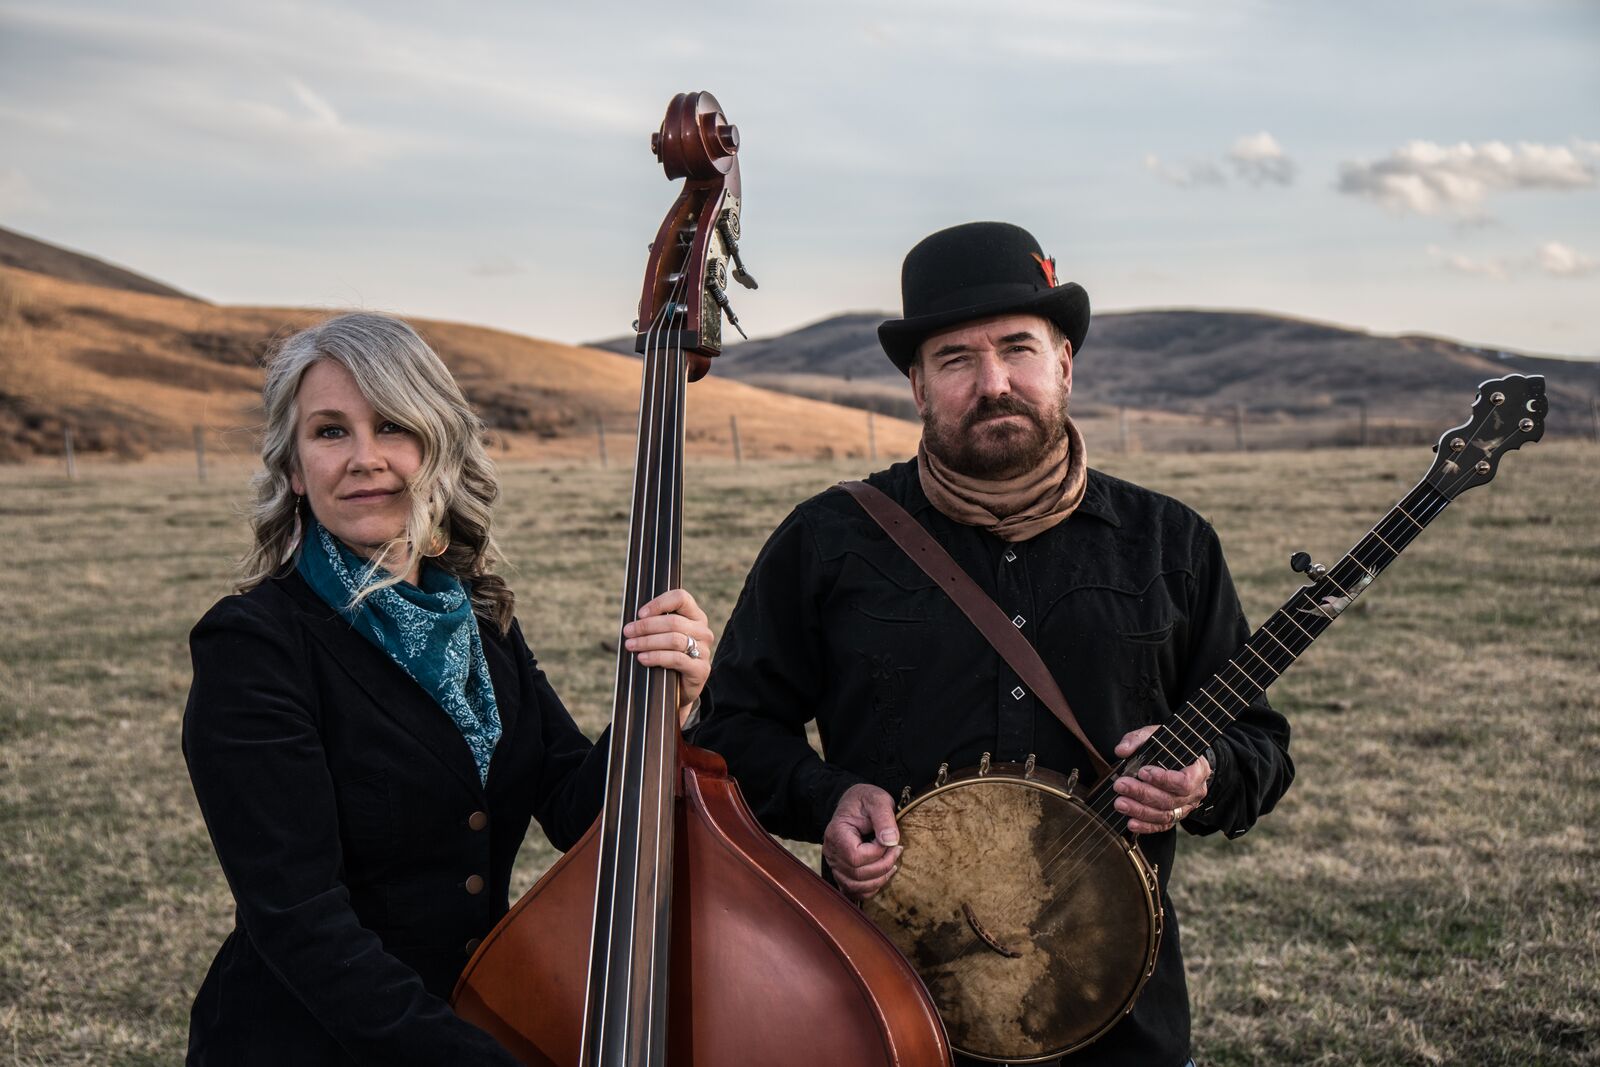 With the background of the Alberta foothills, a woman stands with her double bass and a man stands to her right with a guitar